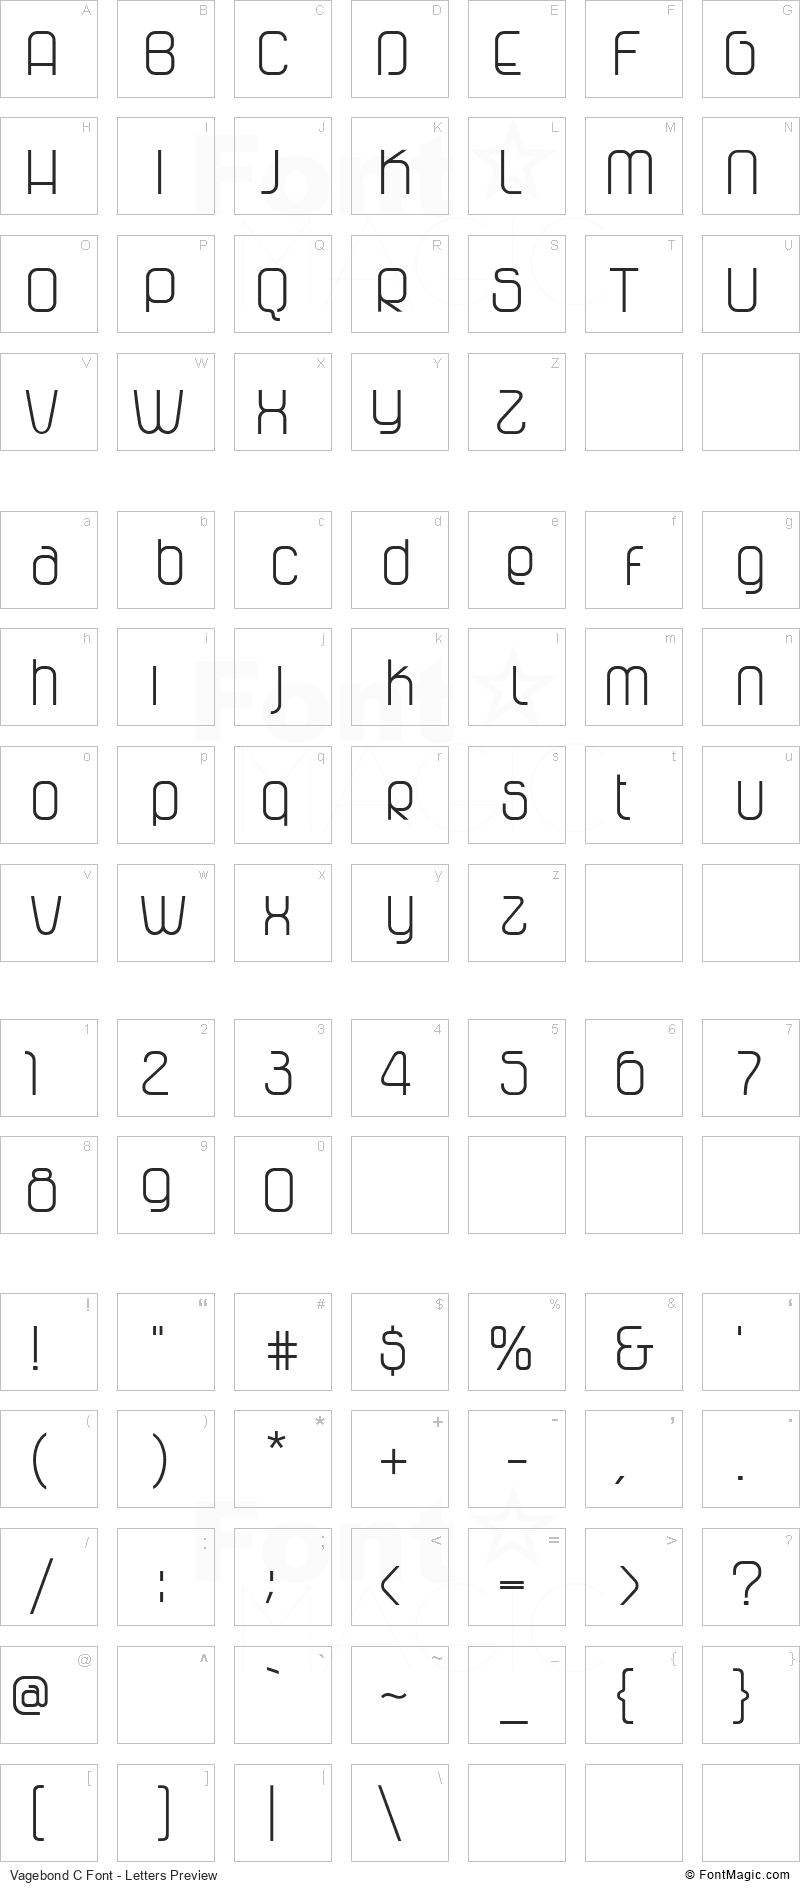 Vagebond C Font - All Latters Preview Chart